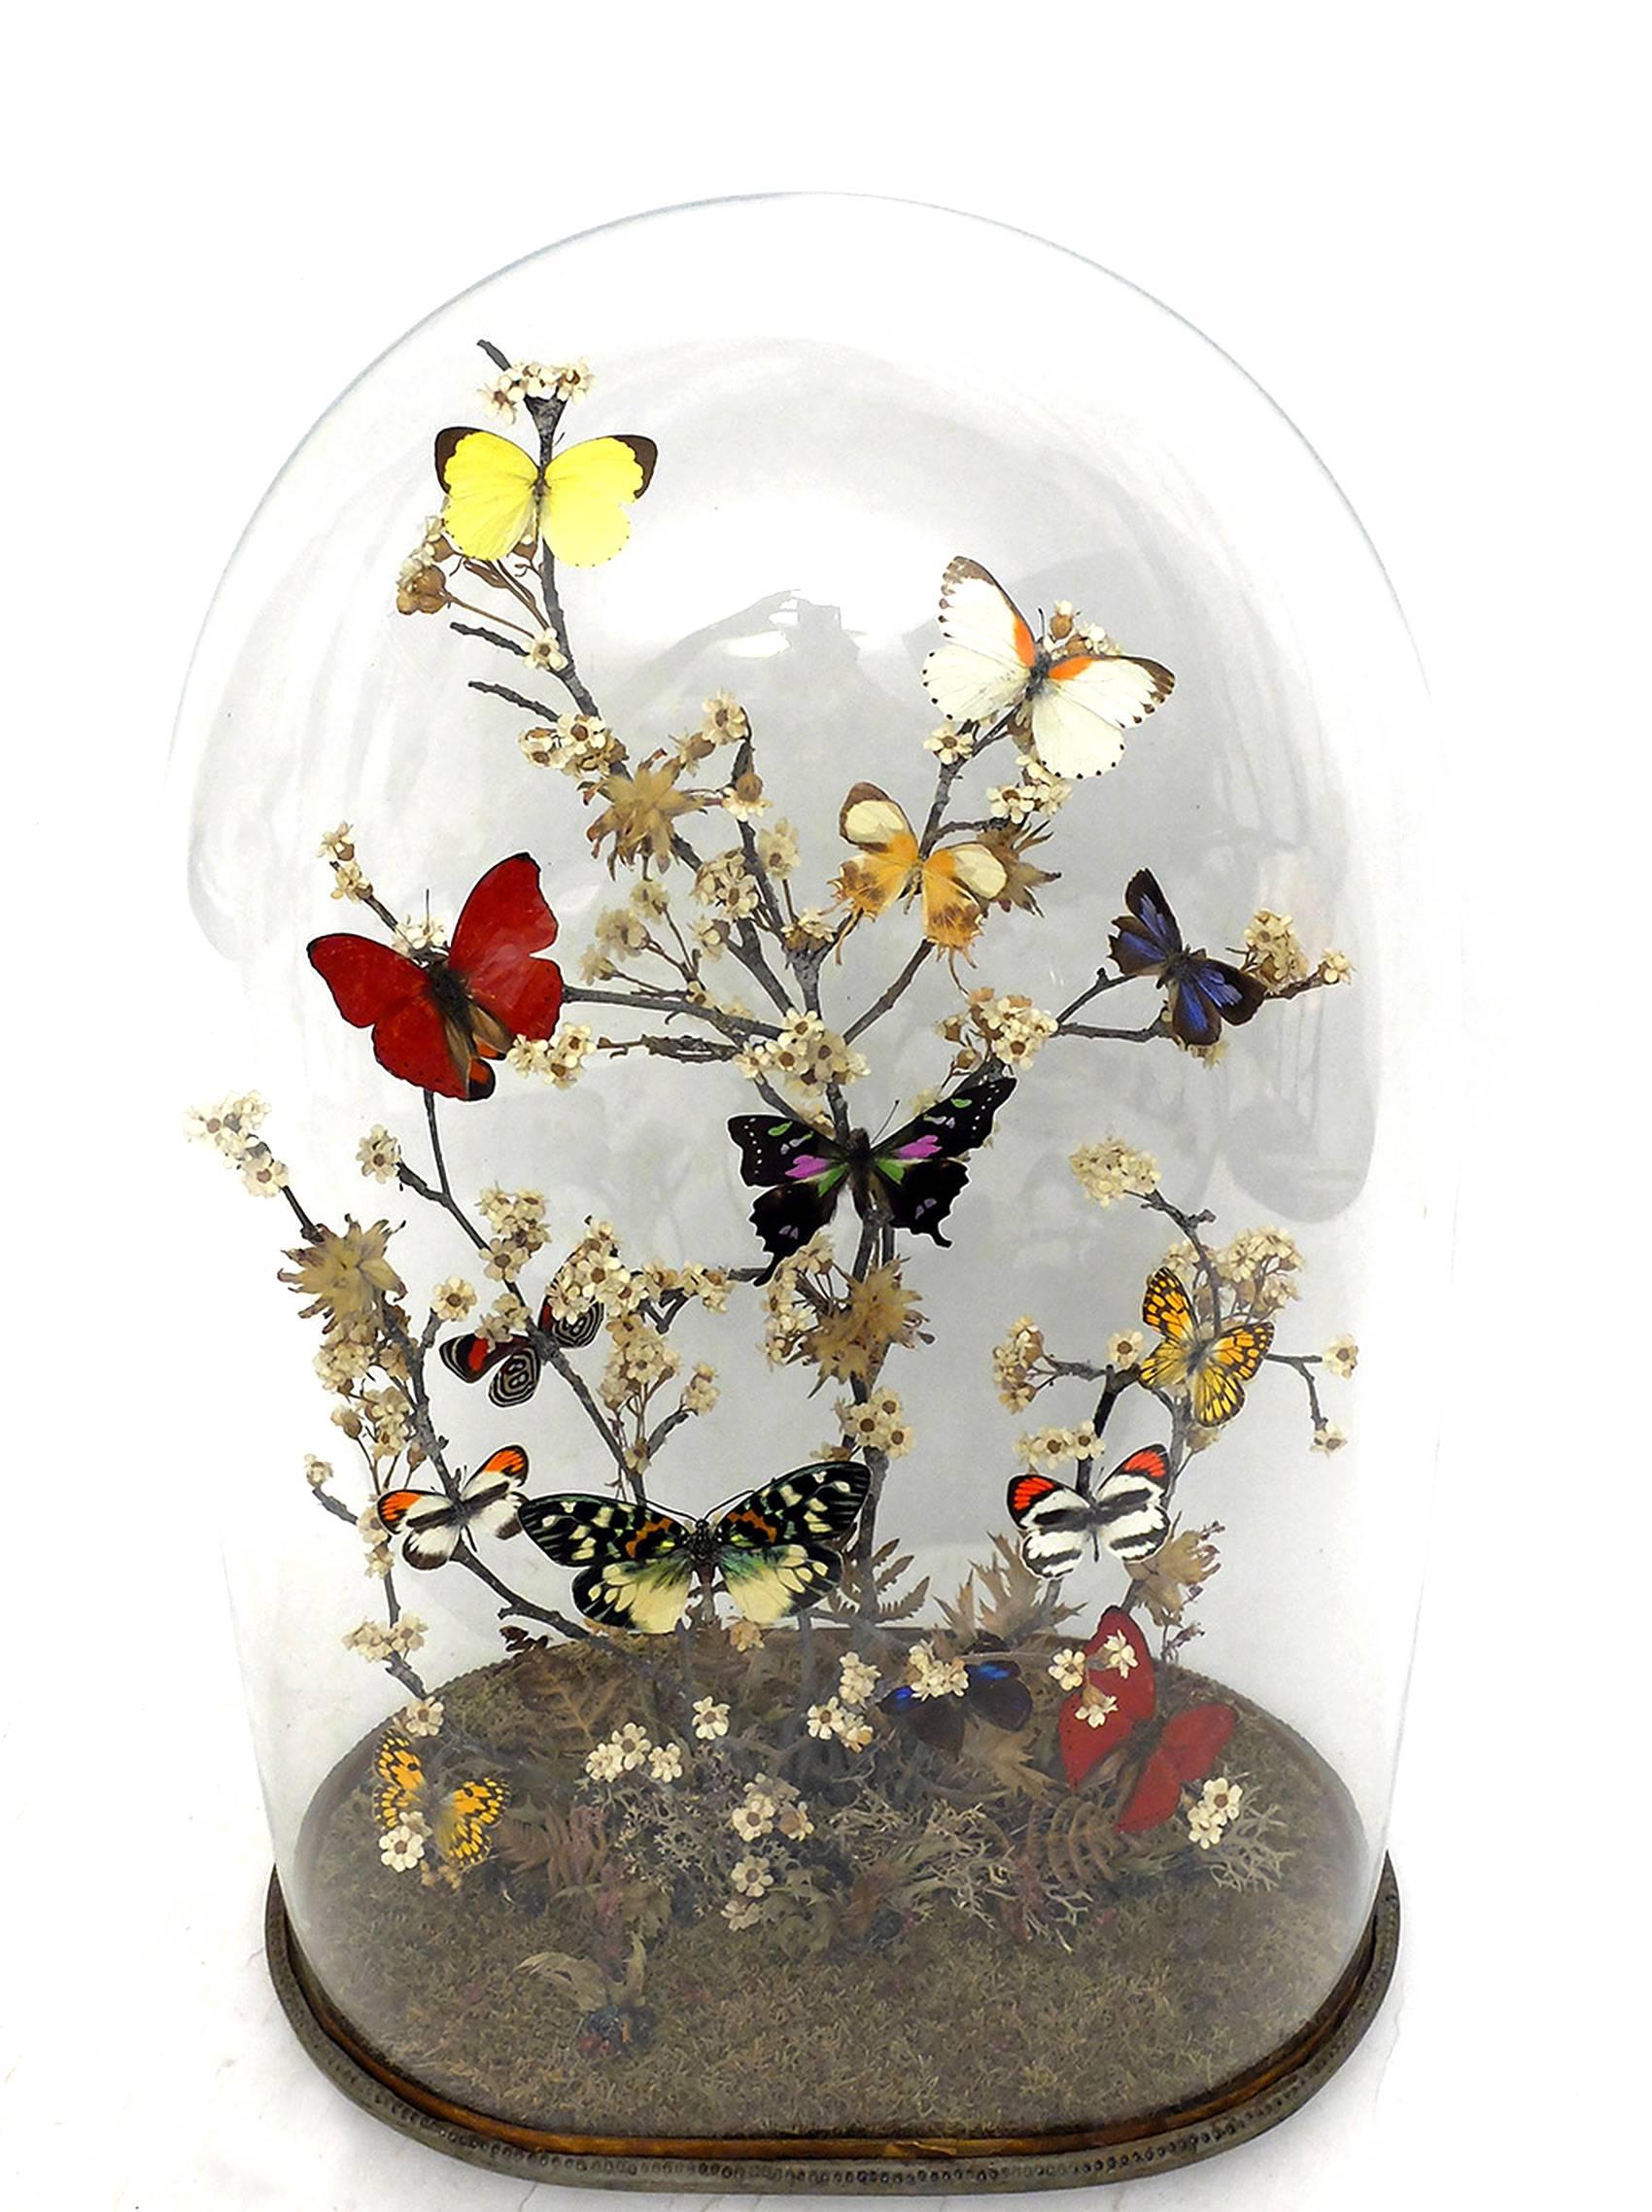 A Diorama with natural Wunderkammer Specimens of 15 butterflies leaned over flowering tree branches willing over moss the Specimens are mounted inside an oval glass dome over a painted wooden base. Rare and magnificent Naturalis Historia specimen.